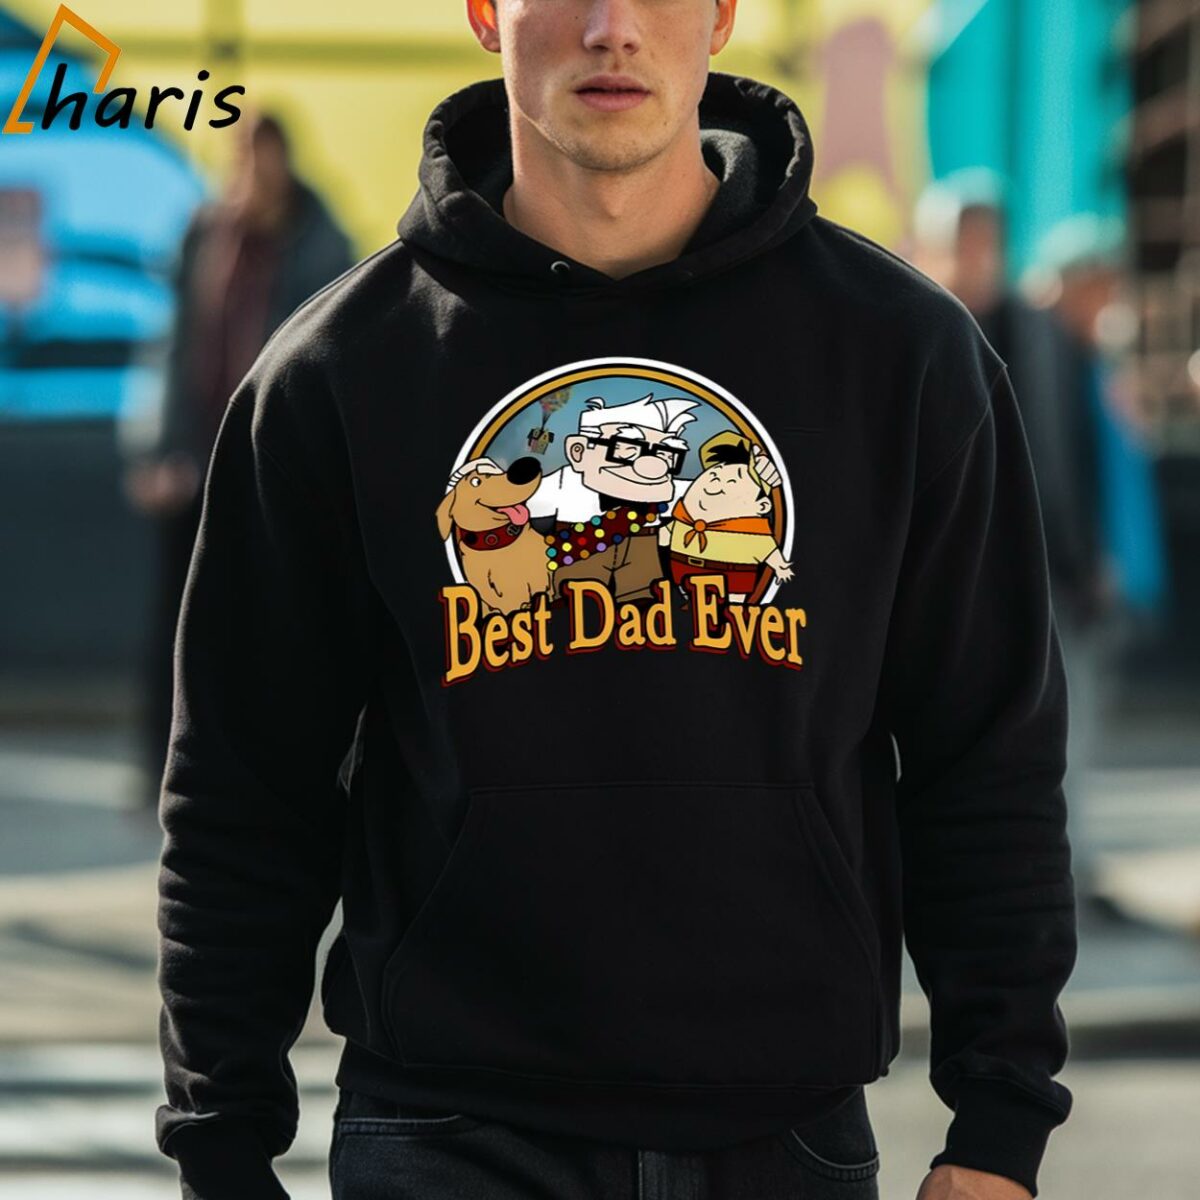 Pixar Up Best Dad Ever Funny Disney Shirts For Dads 3 hoodie